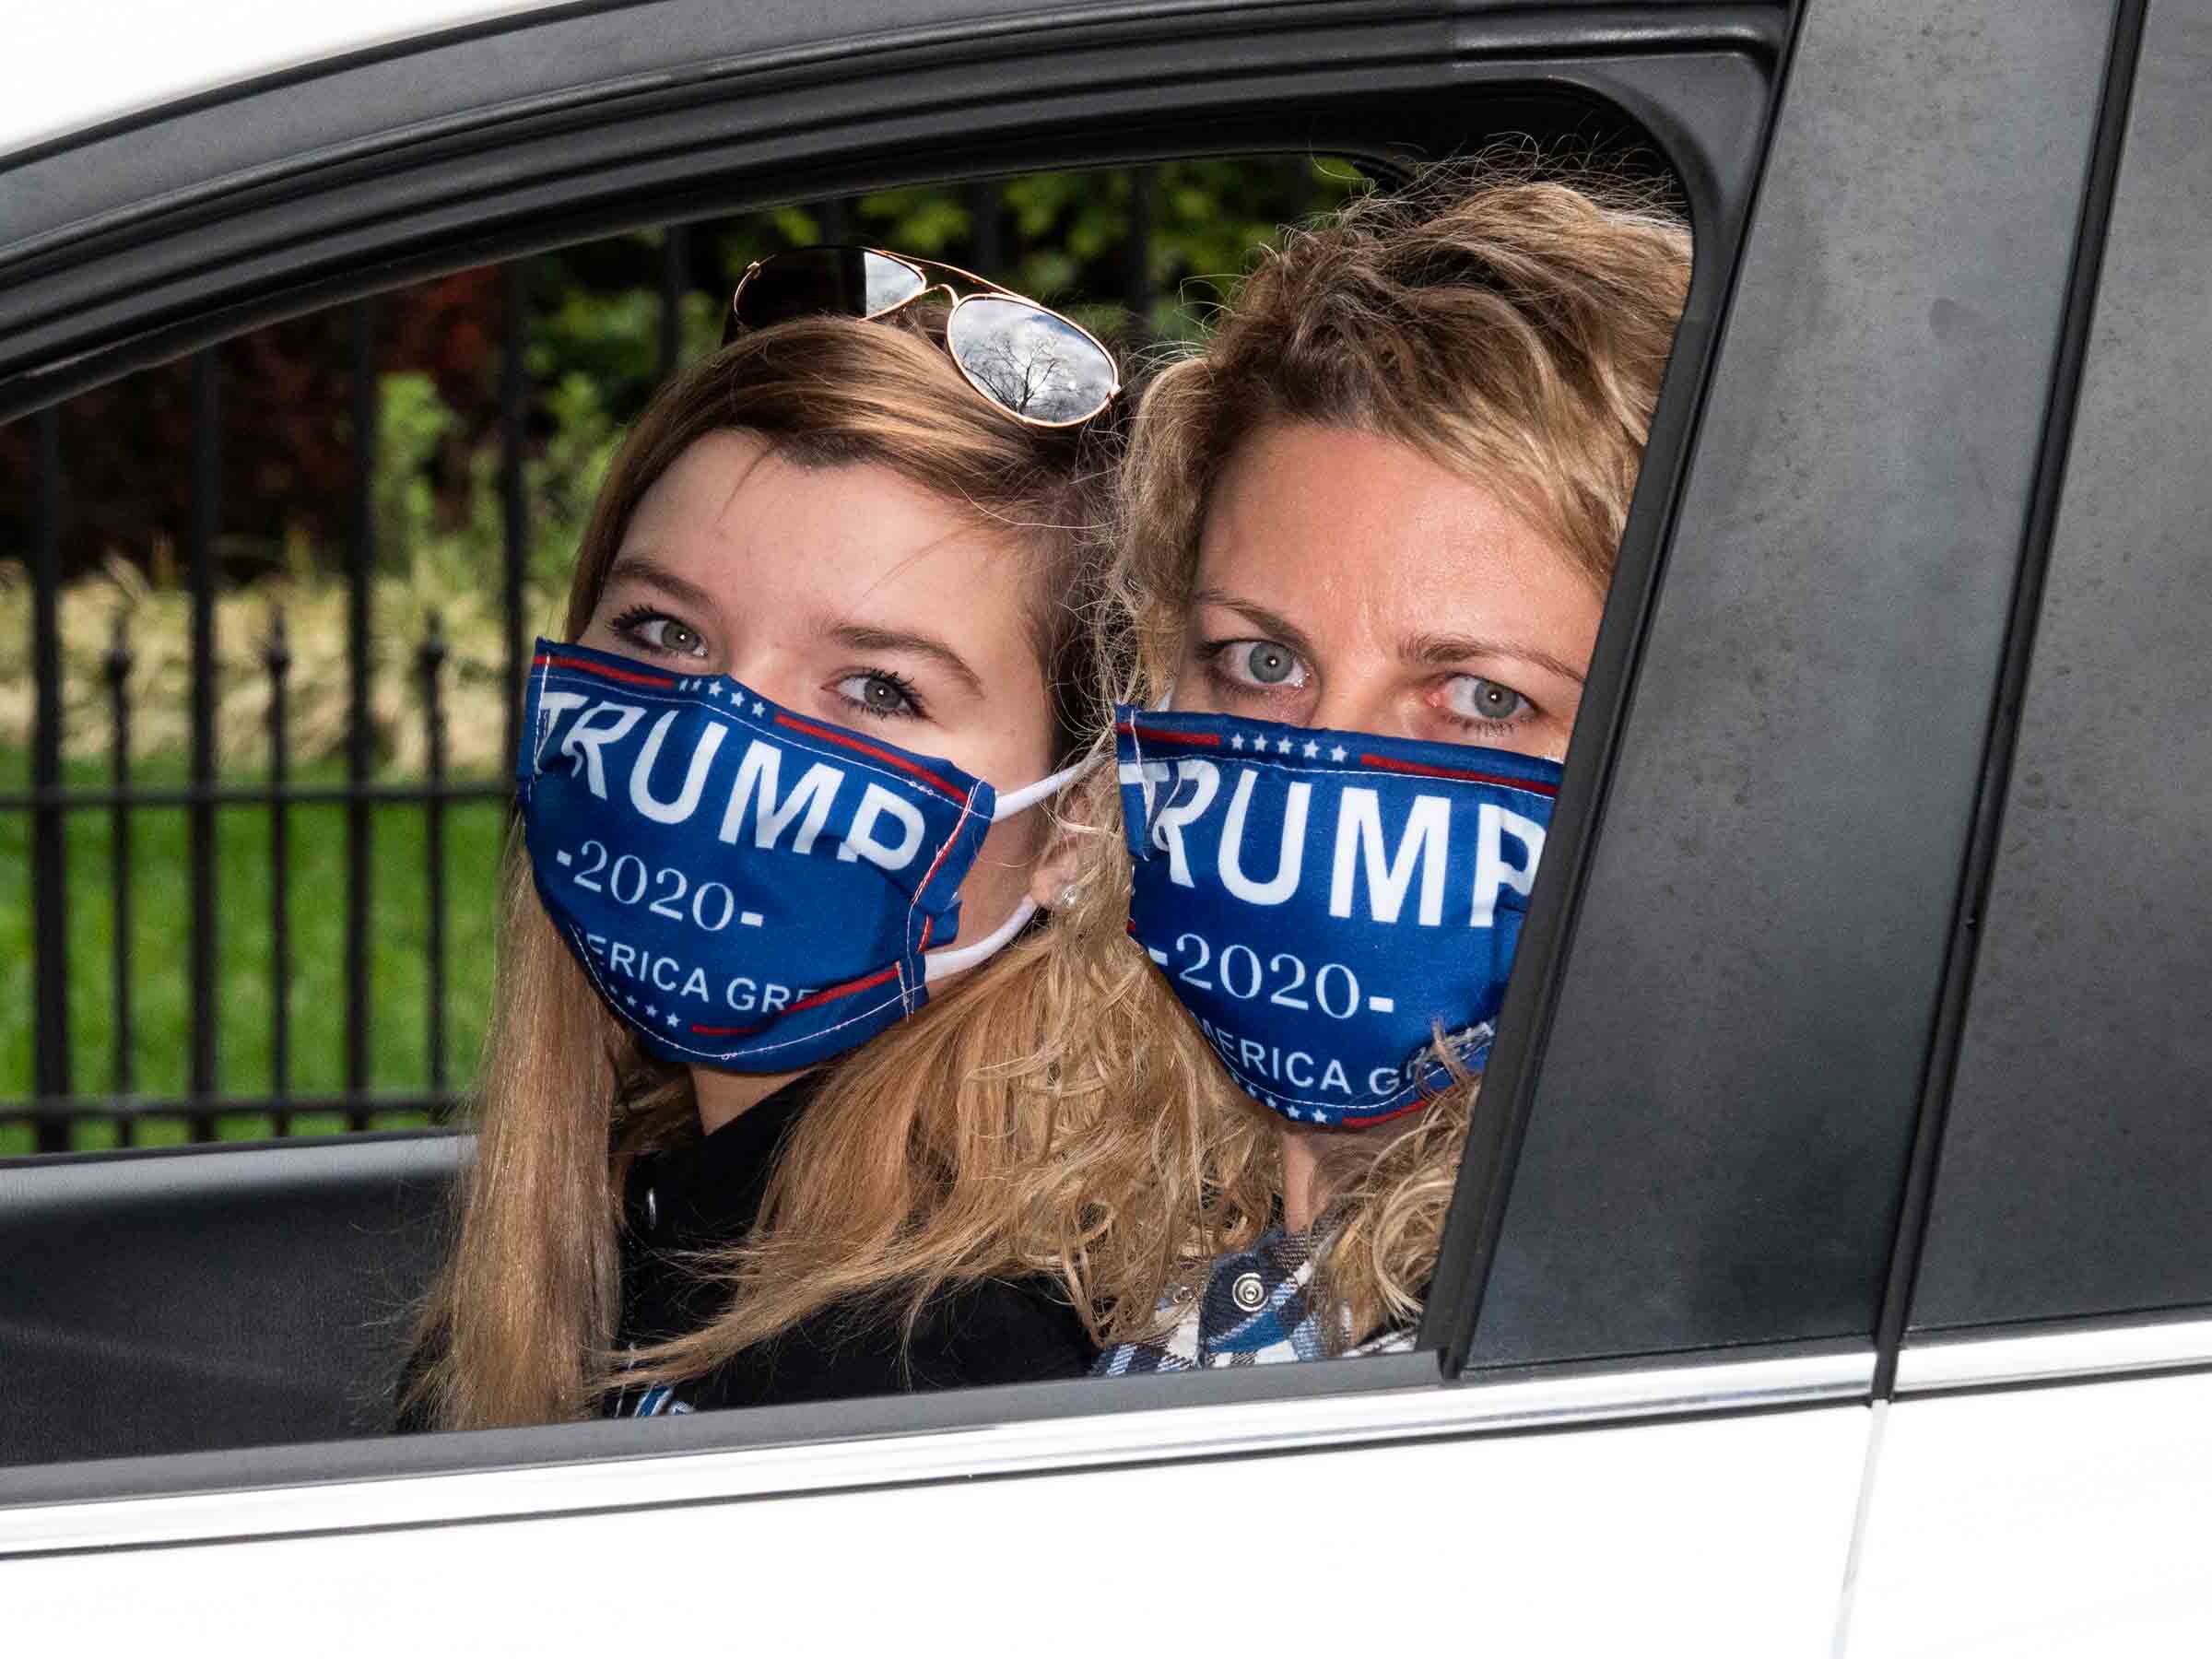 2020. USA. Annapolis, Maryland.  Two protestors, part of a caravan of cars that descended on the Maryland State House in Annapolis on 4/18 to protest the Coronavirus related restrictions